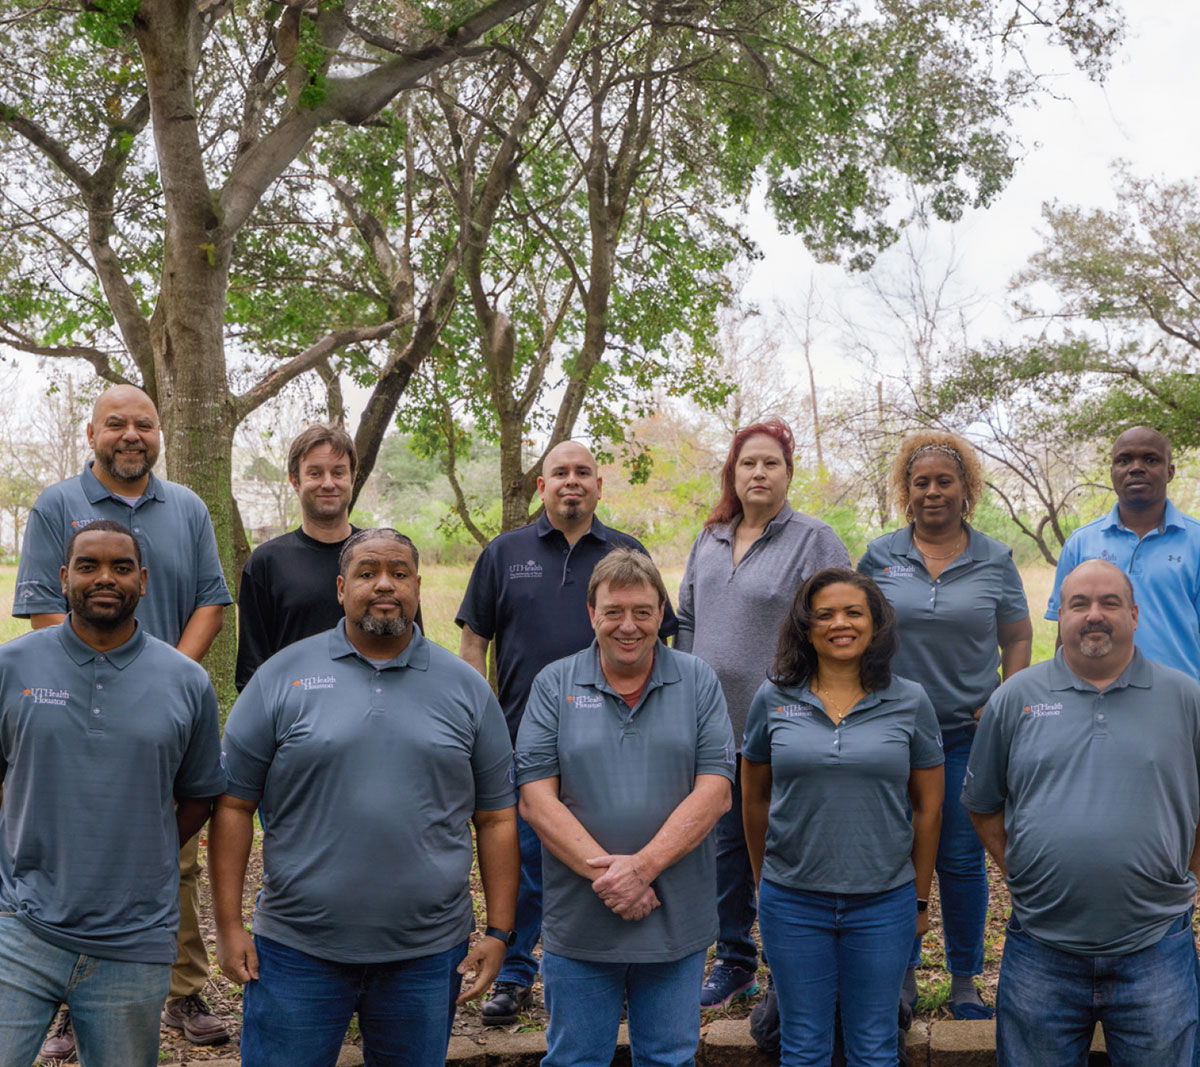 A group of 11 people (David Posado, Naja Brightmon, Alexander Brooks, Tina Bryant, Tiffany Hudson, Olaide Iyiola, Terry Ponder, David Schulman, Brian Thomas, Ruben Valle, and Brian Yegge) in blue and gray polos post together in front of a tree on an overcast day.